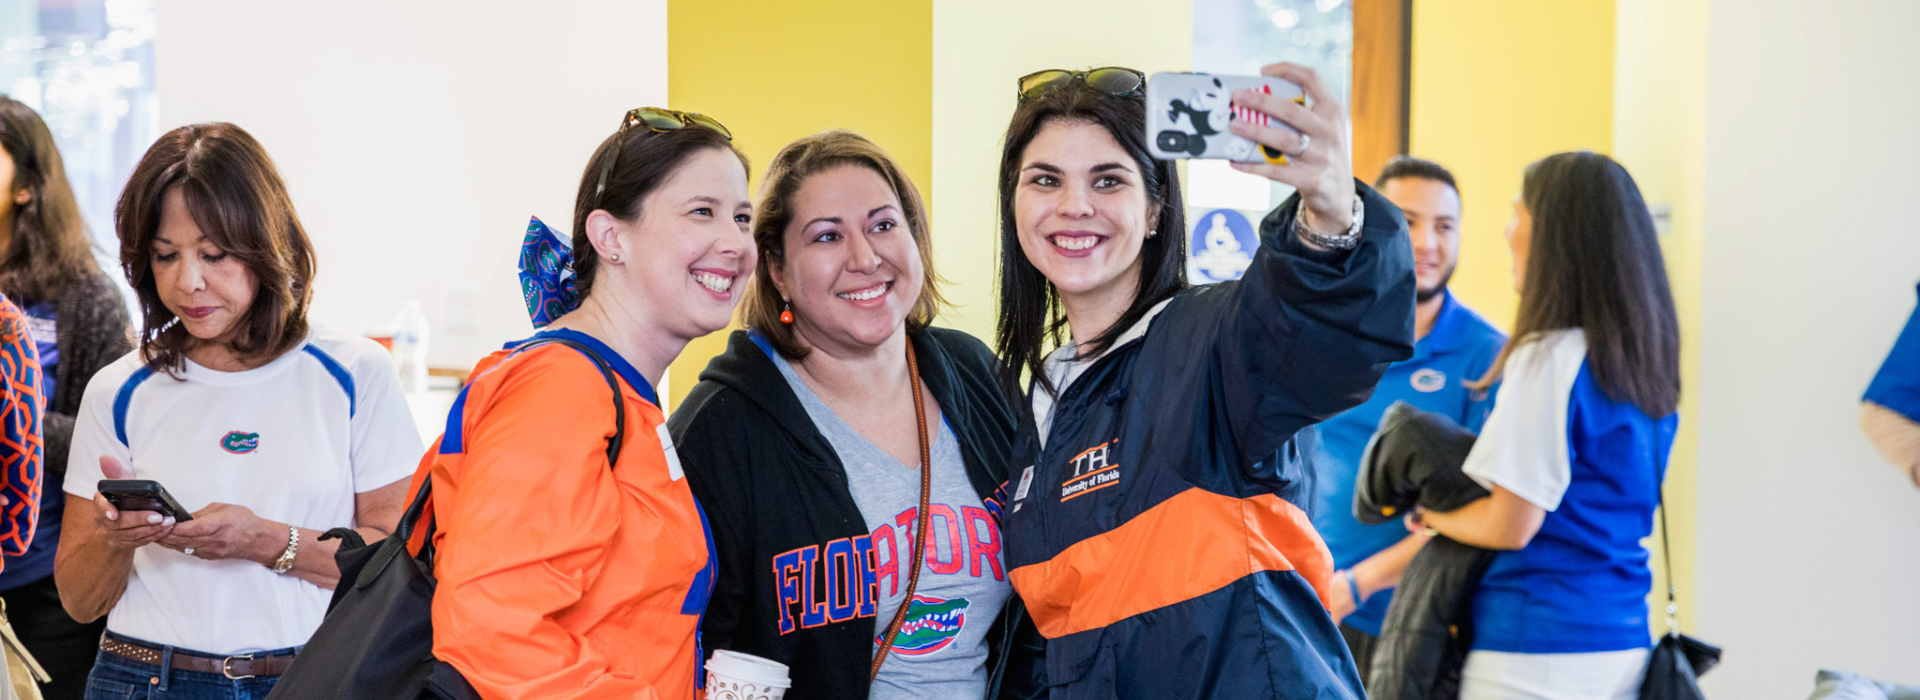 Three women stand together for a selfie style photo.